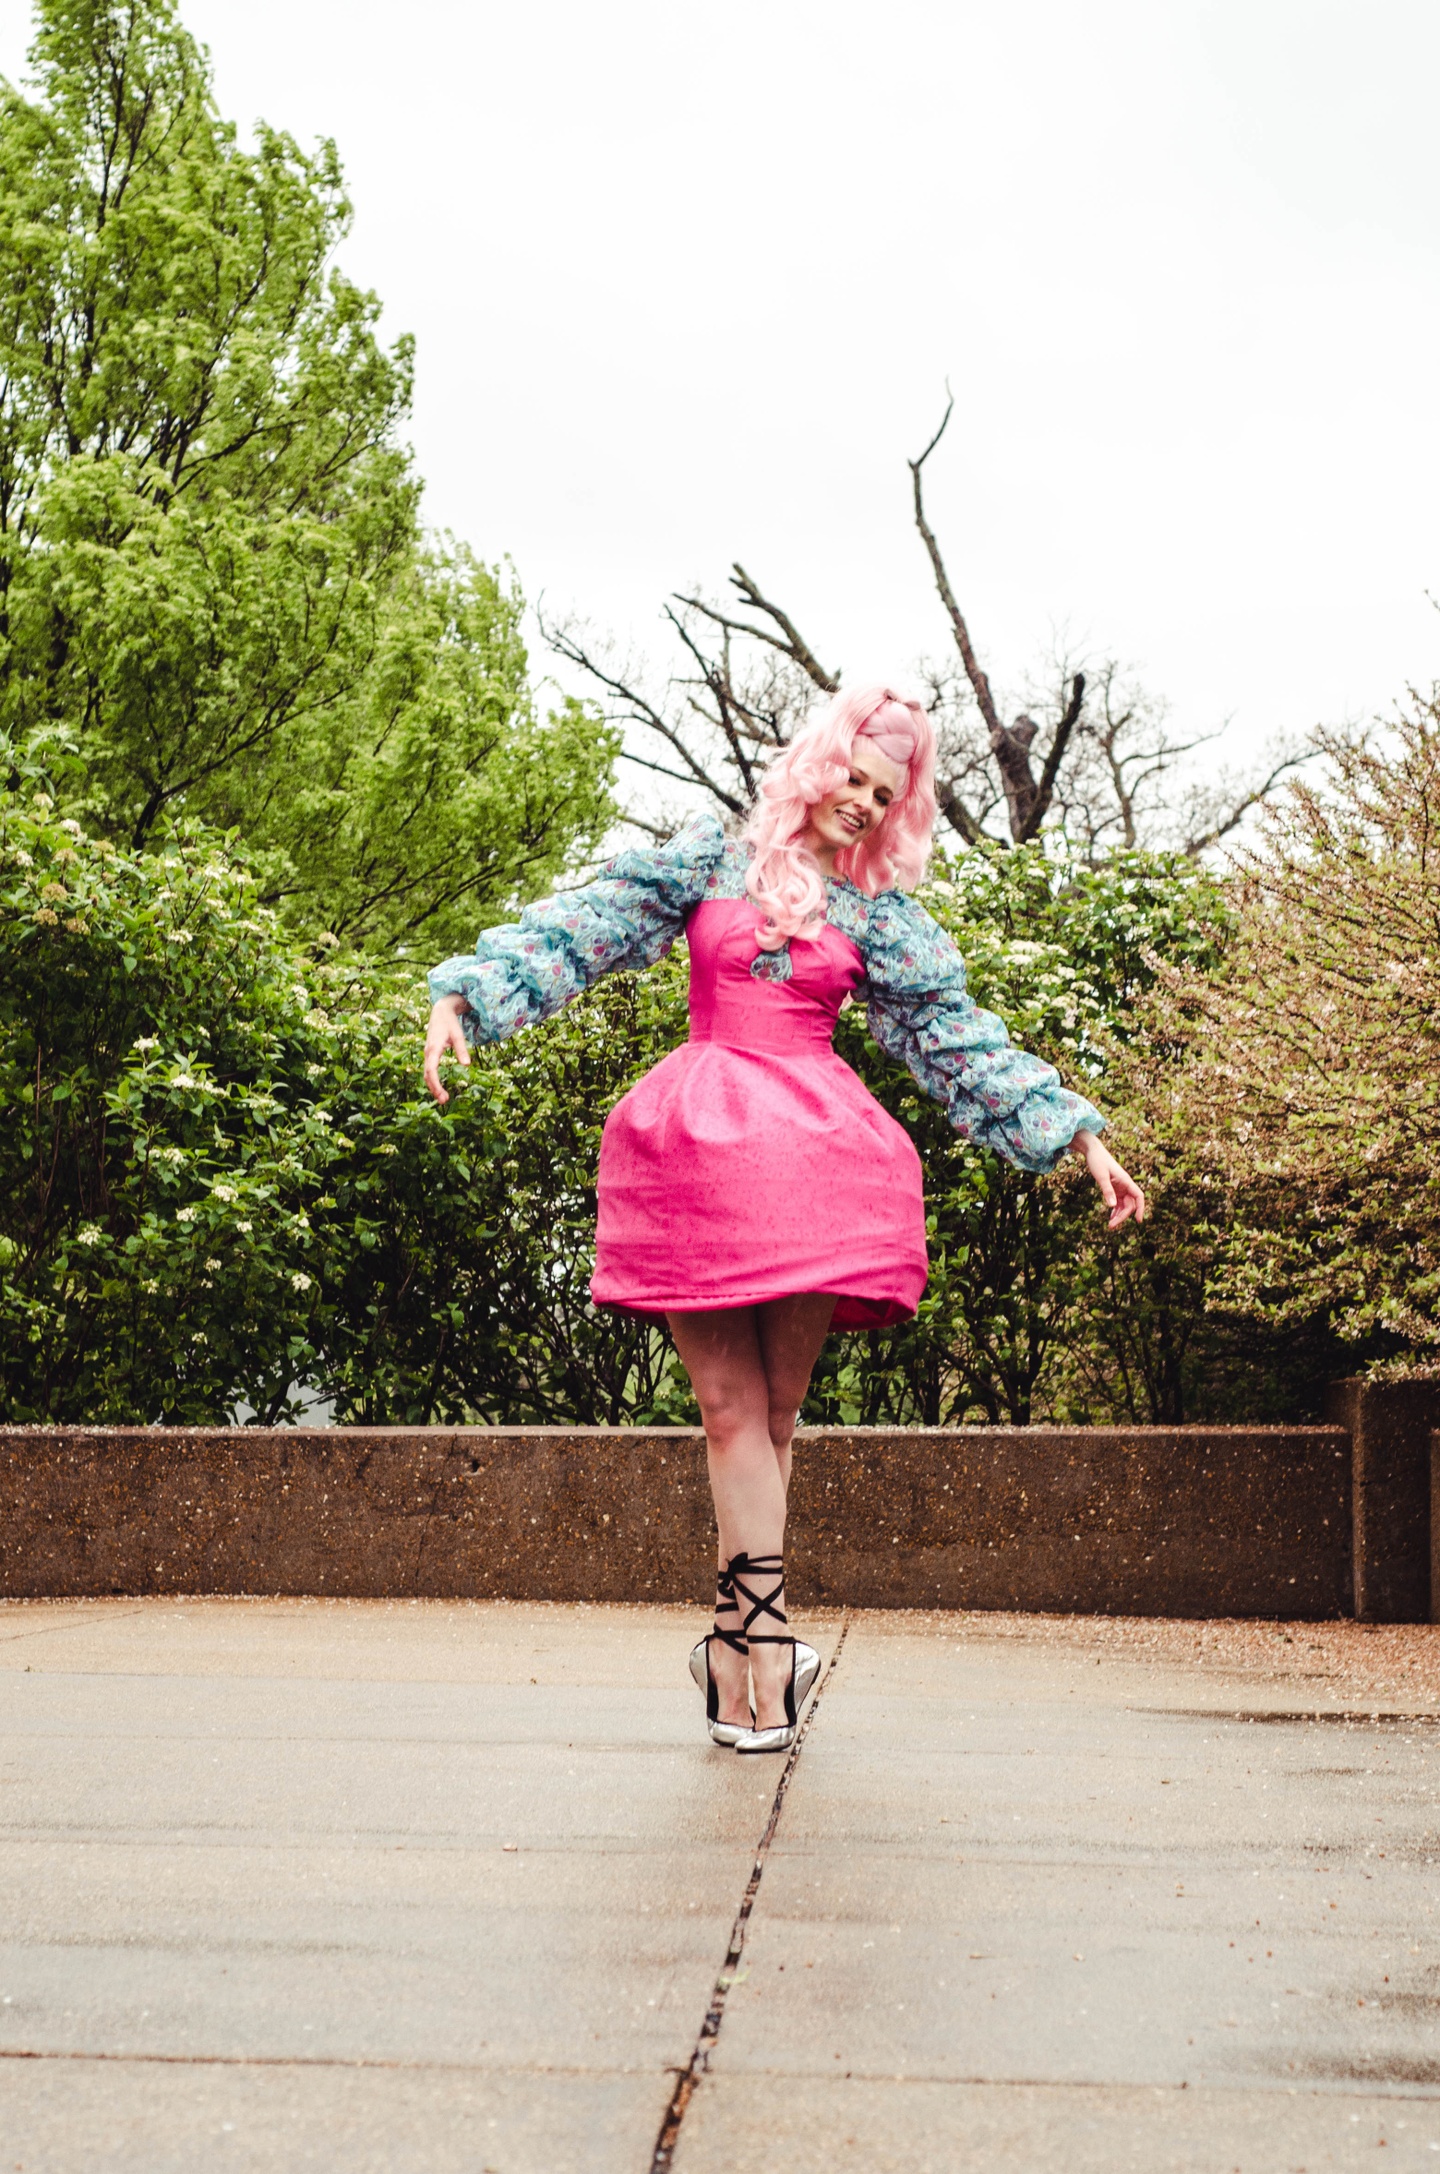 Model in a pink curly wig wears a hot pink thigh-length dress with a stiff, balloon-shaped skirt and a corseted top, over a long sleeve ruffled shirt made of blue patterned fabric. The model wears silver ballet shoes and executes pointe.